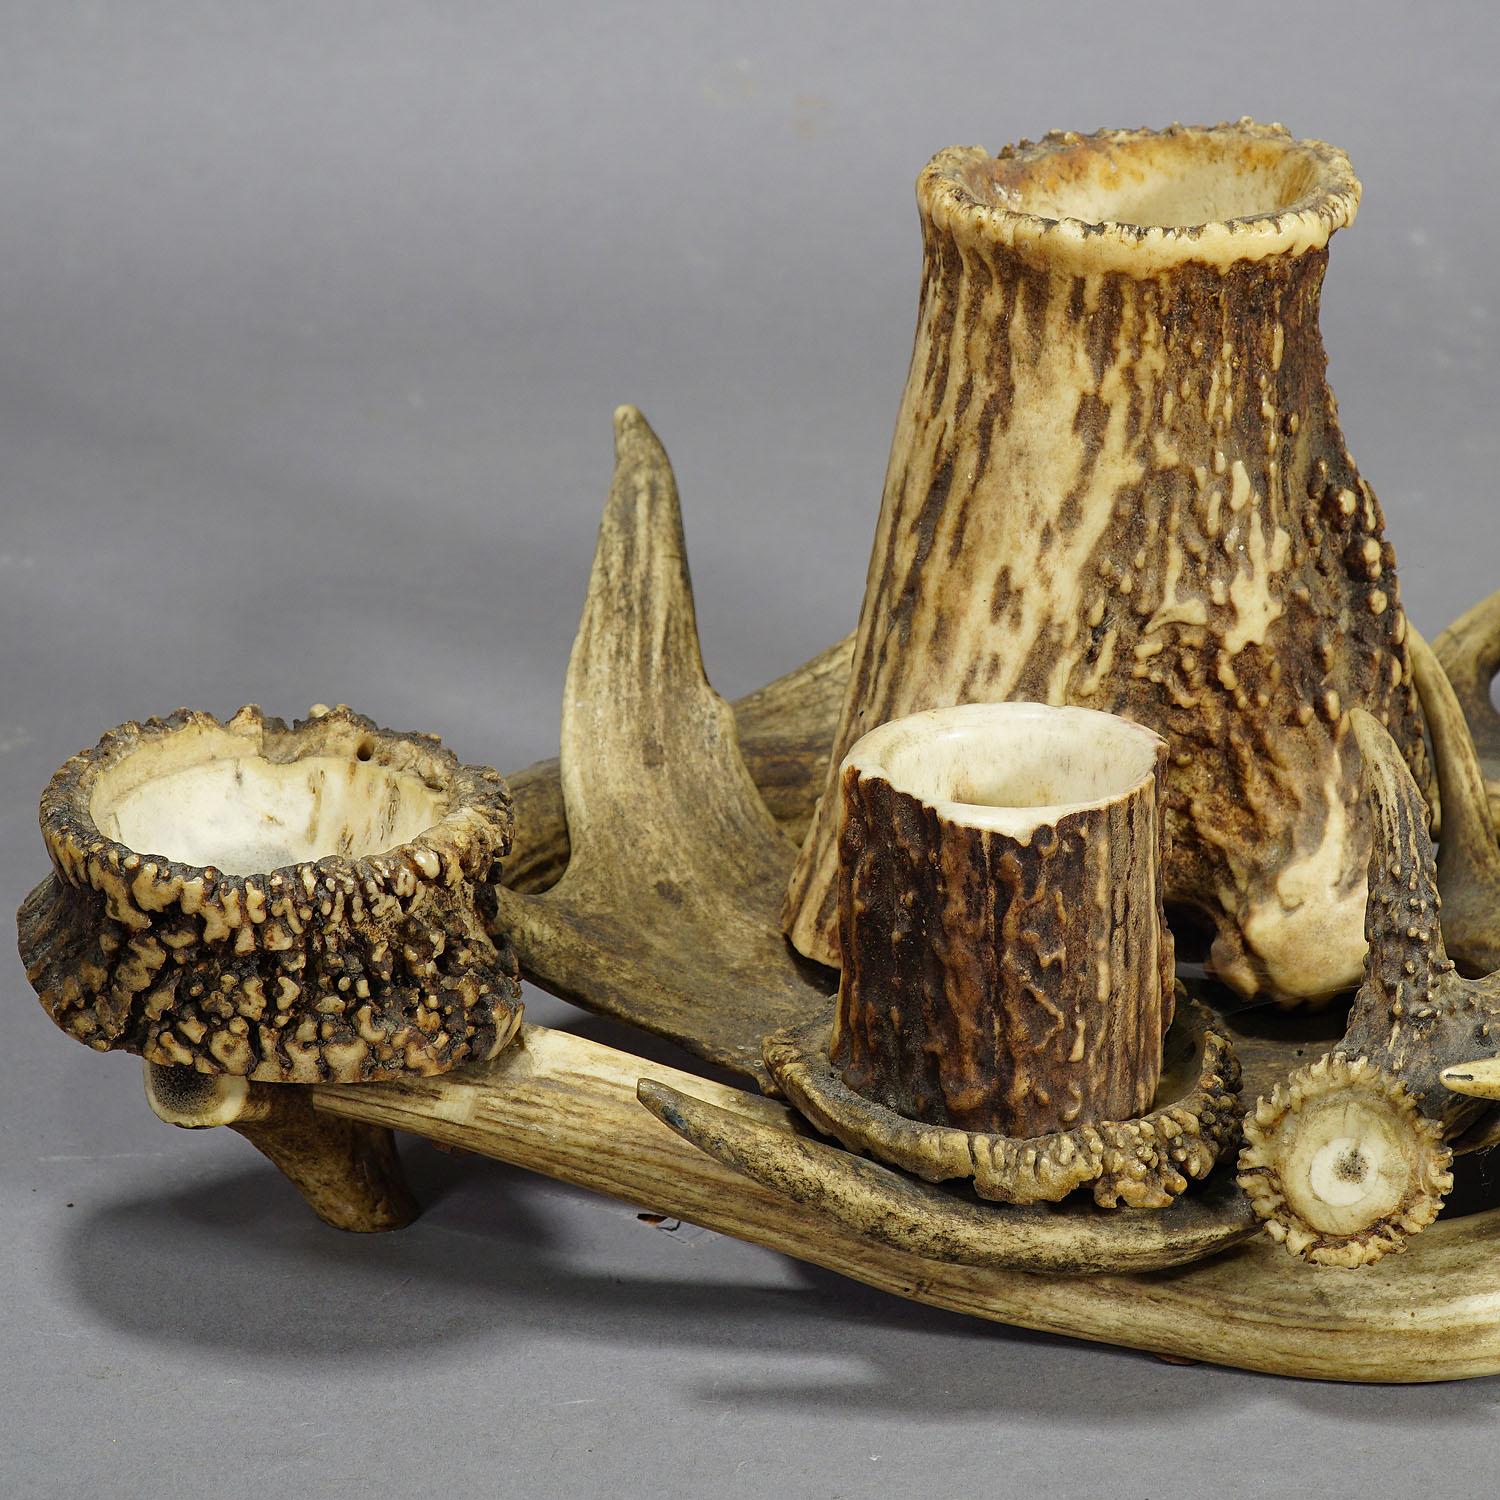 The  antique antler smoking desk set is made of original antlers from the deer and the stag. It was in Germany, circa 1900.

Measures: Width 16.93